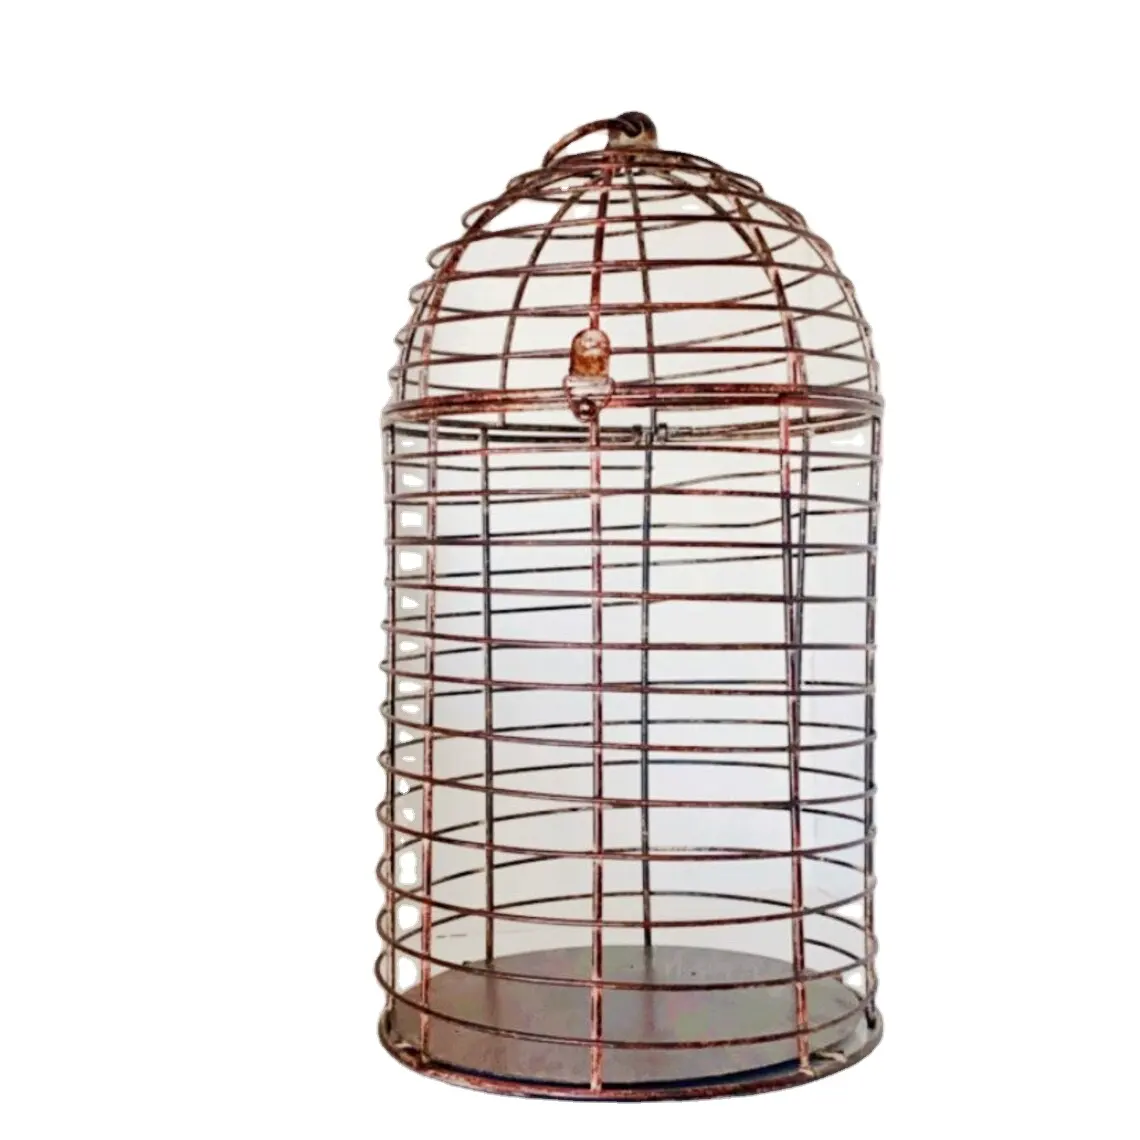 Decorative table top fancy cage for home garden wedding decorative hanging bird cage wire lantern candle holder indoor outdoor